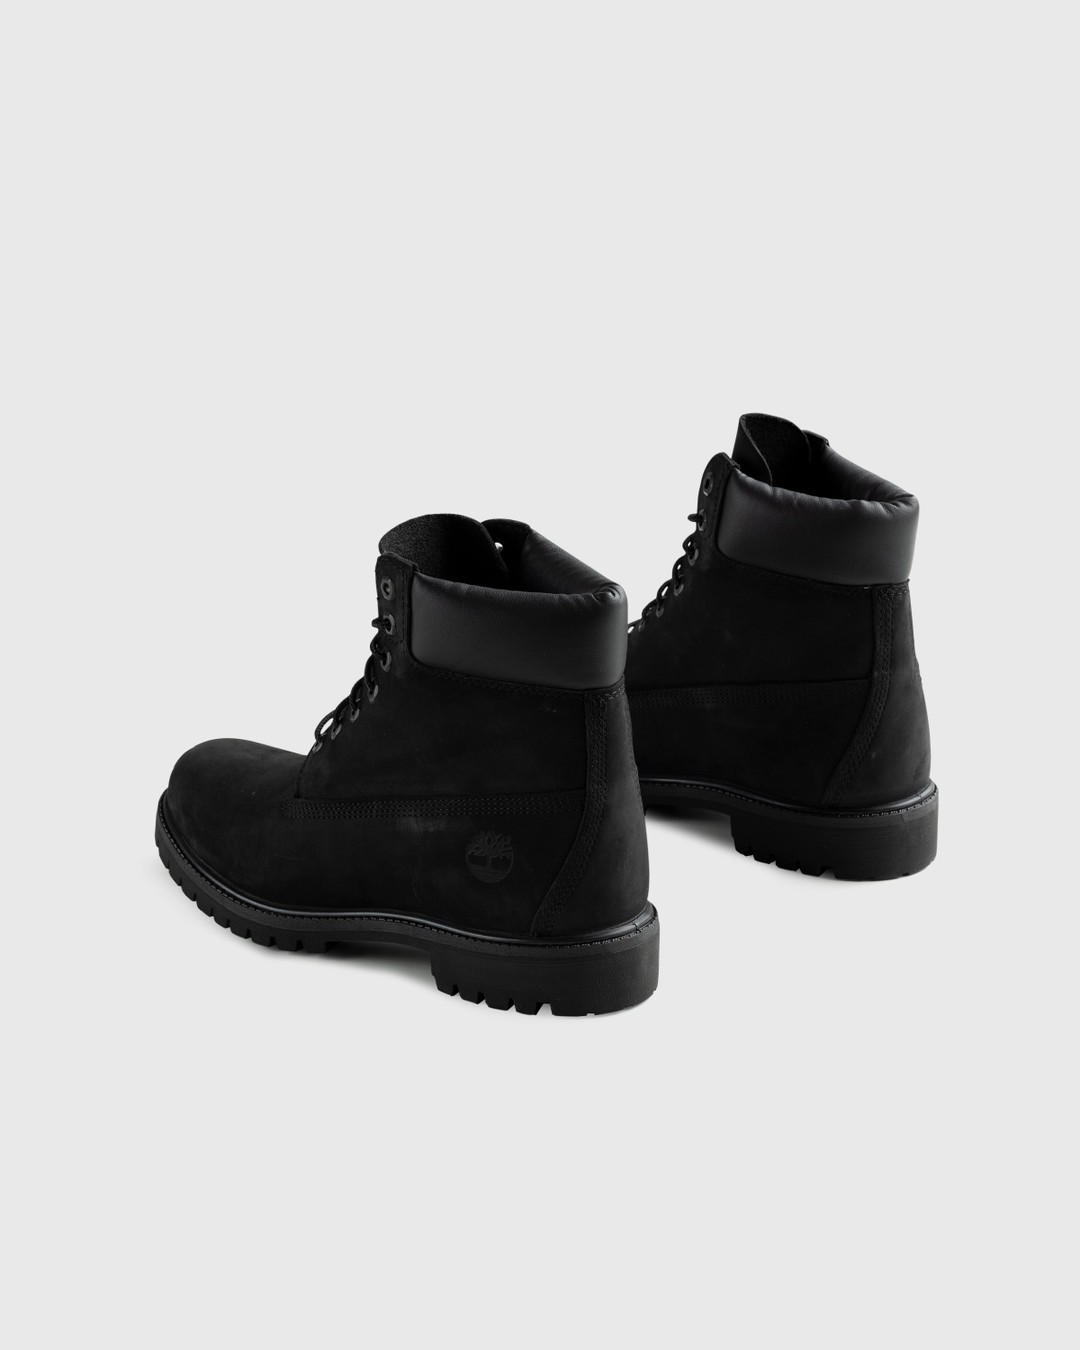 Timberland – 6 Inch Premium Boot Black - Laced Up Boots - Black - Image 4